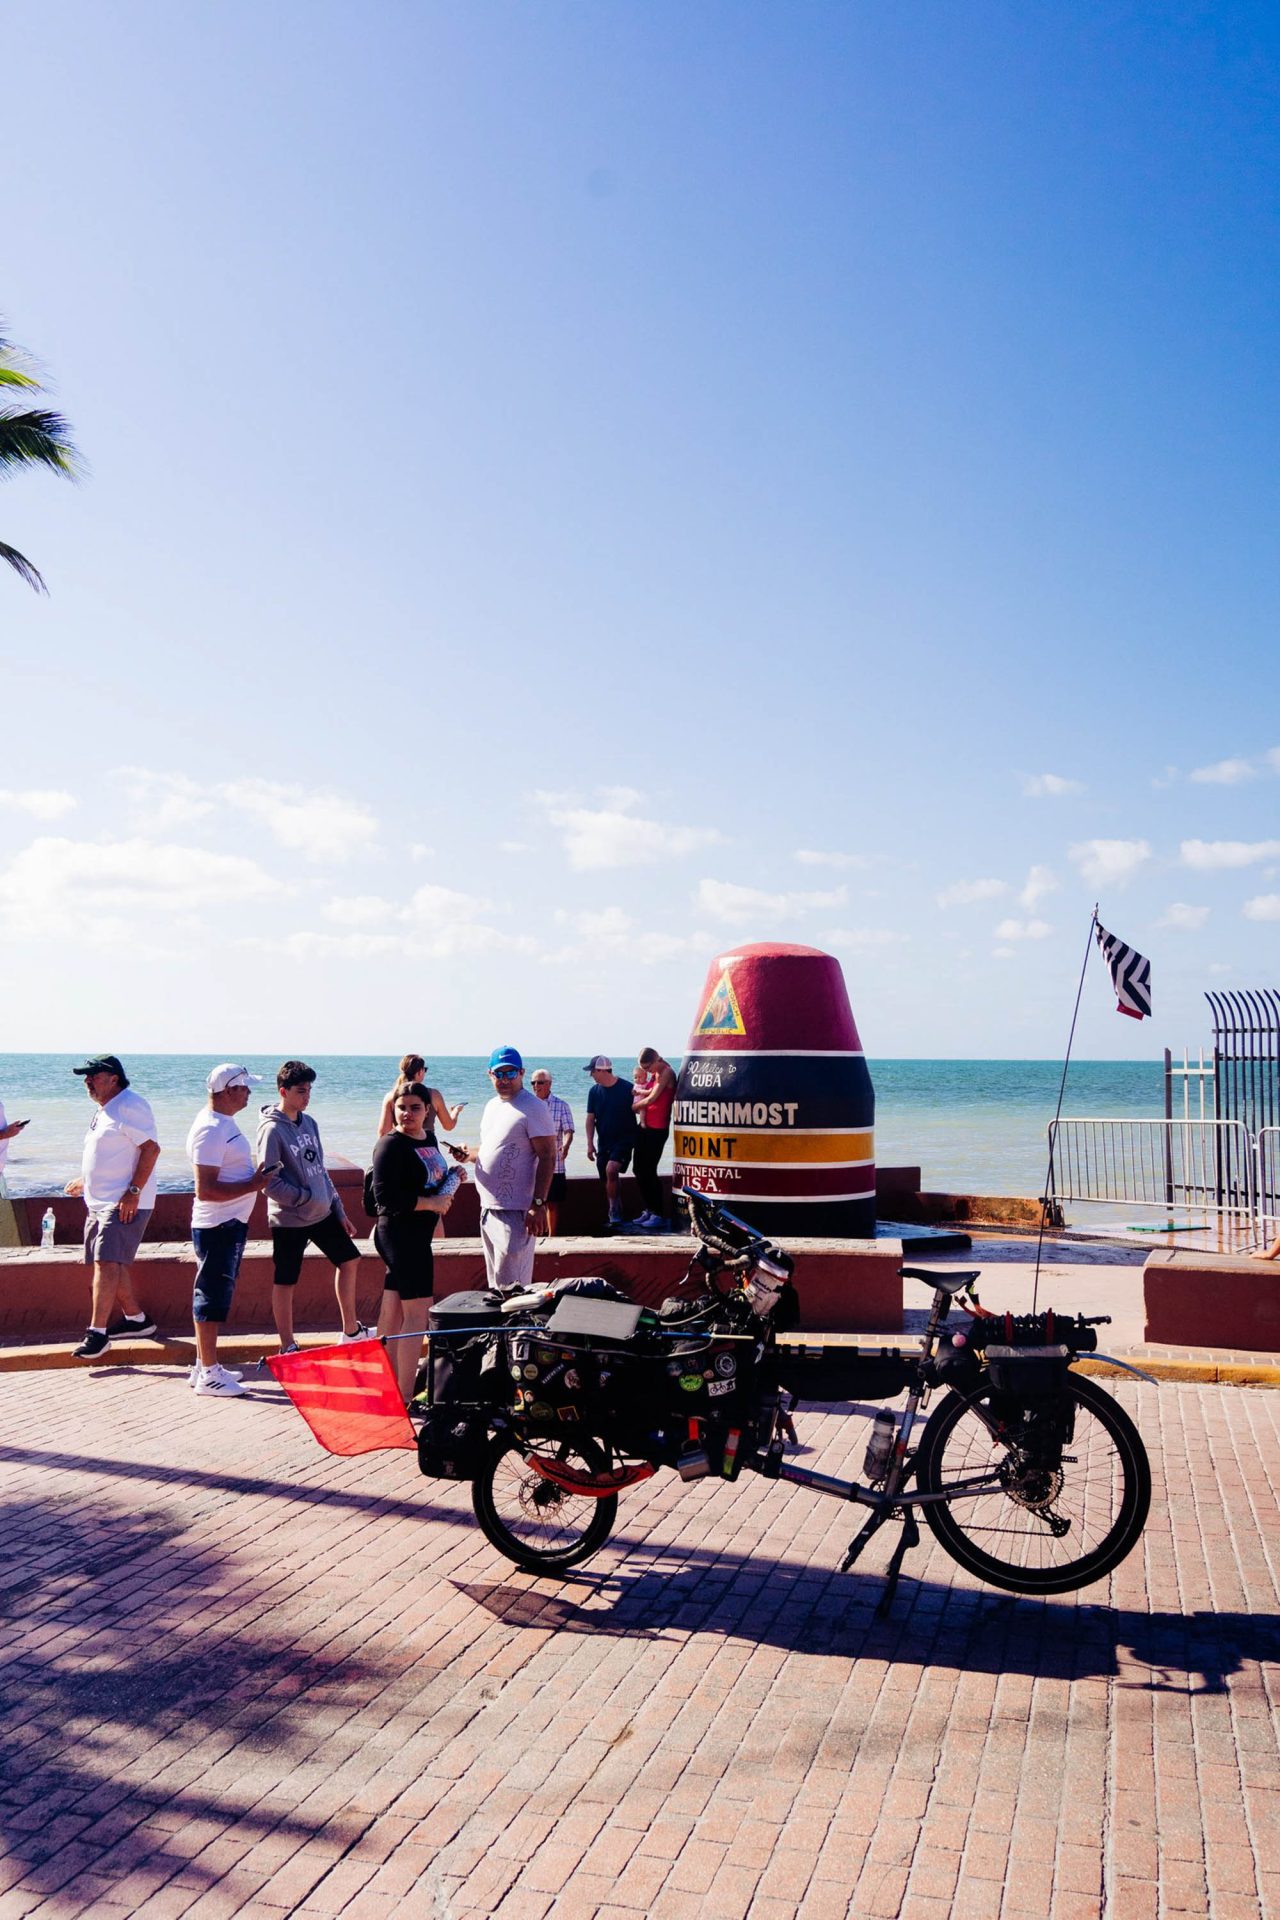 Binggeser's cargo bike parked in Key West, Florida, at the marker for the southernmost point in the continental U.S. A small crowd stands behind the bike, some of them looking at it curiously.